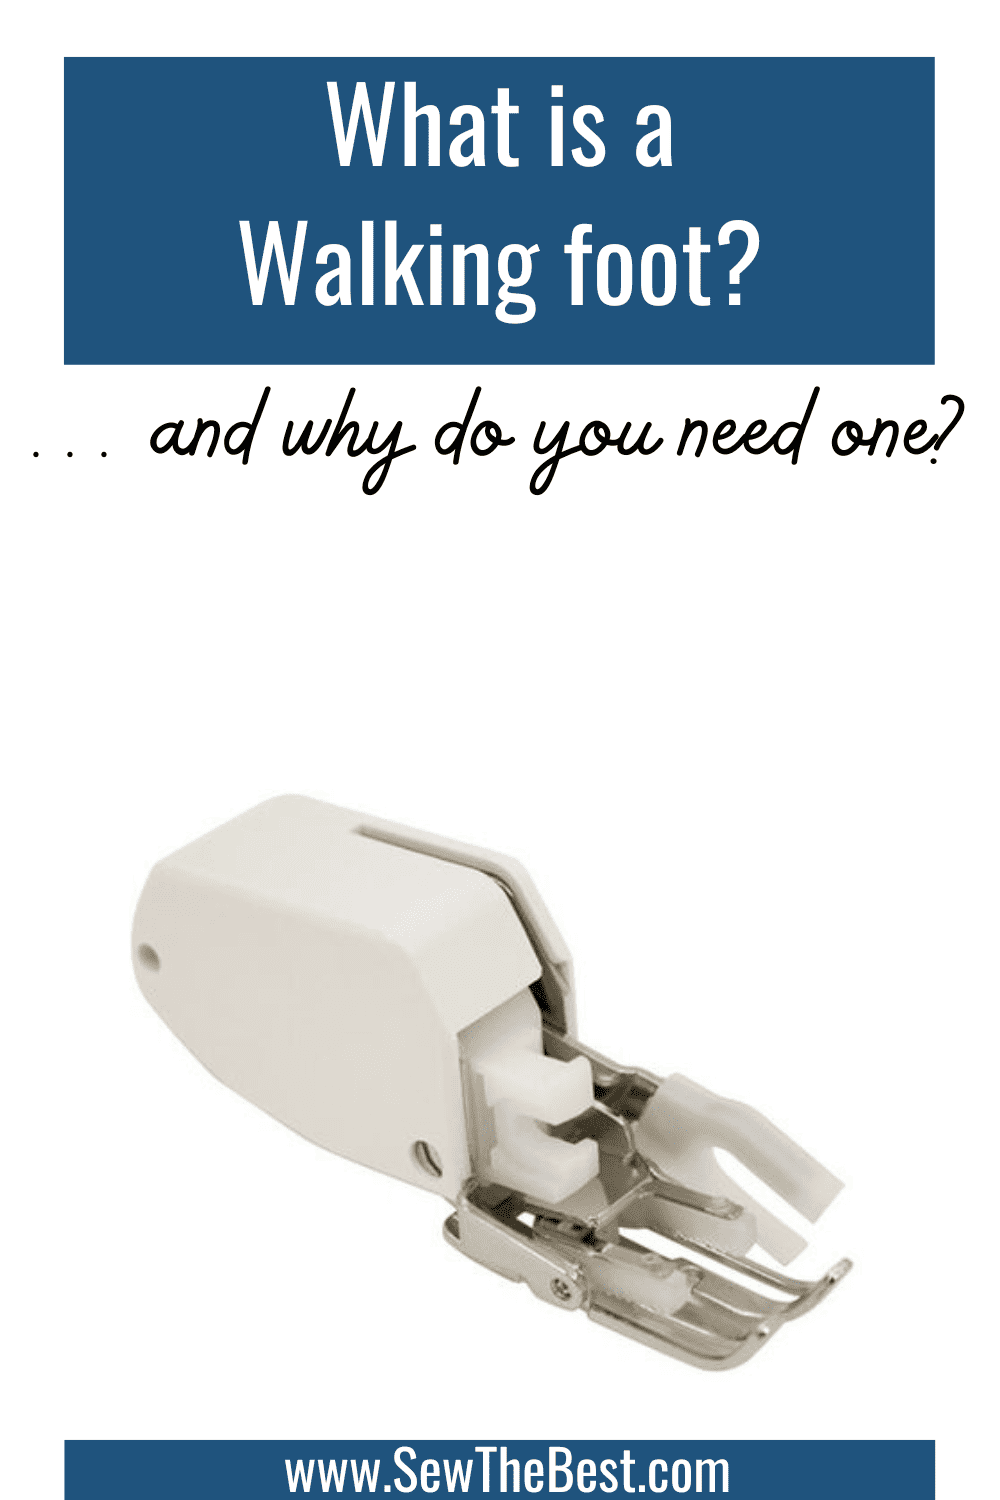 What is a Walking Foot? ... and why do you need one? Picture of a walking foot follows.